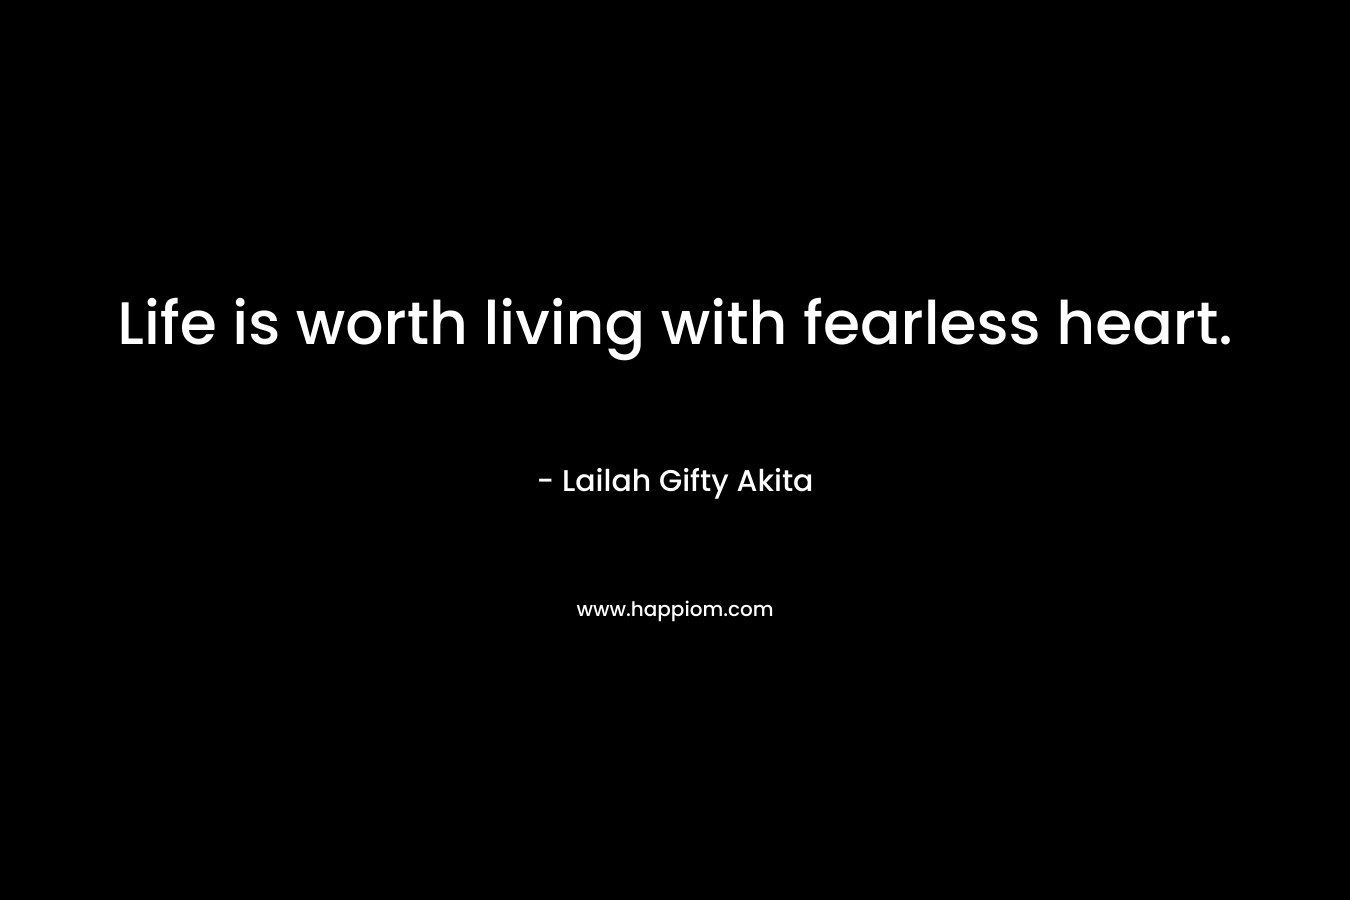 Life is worth living with fearless heart.